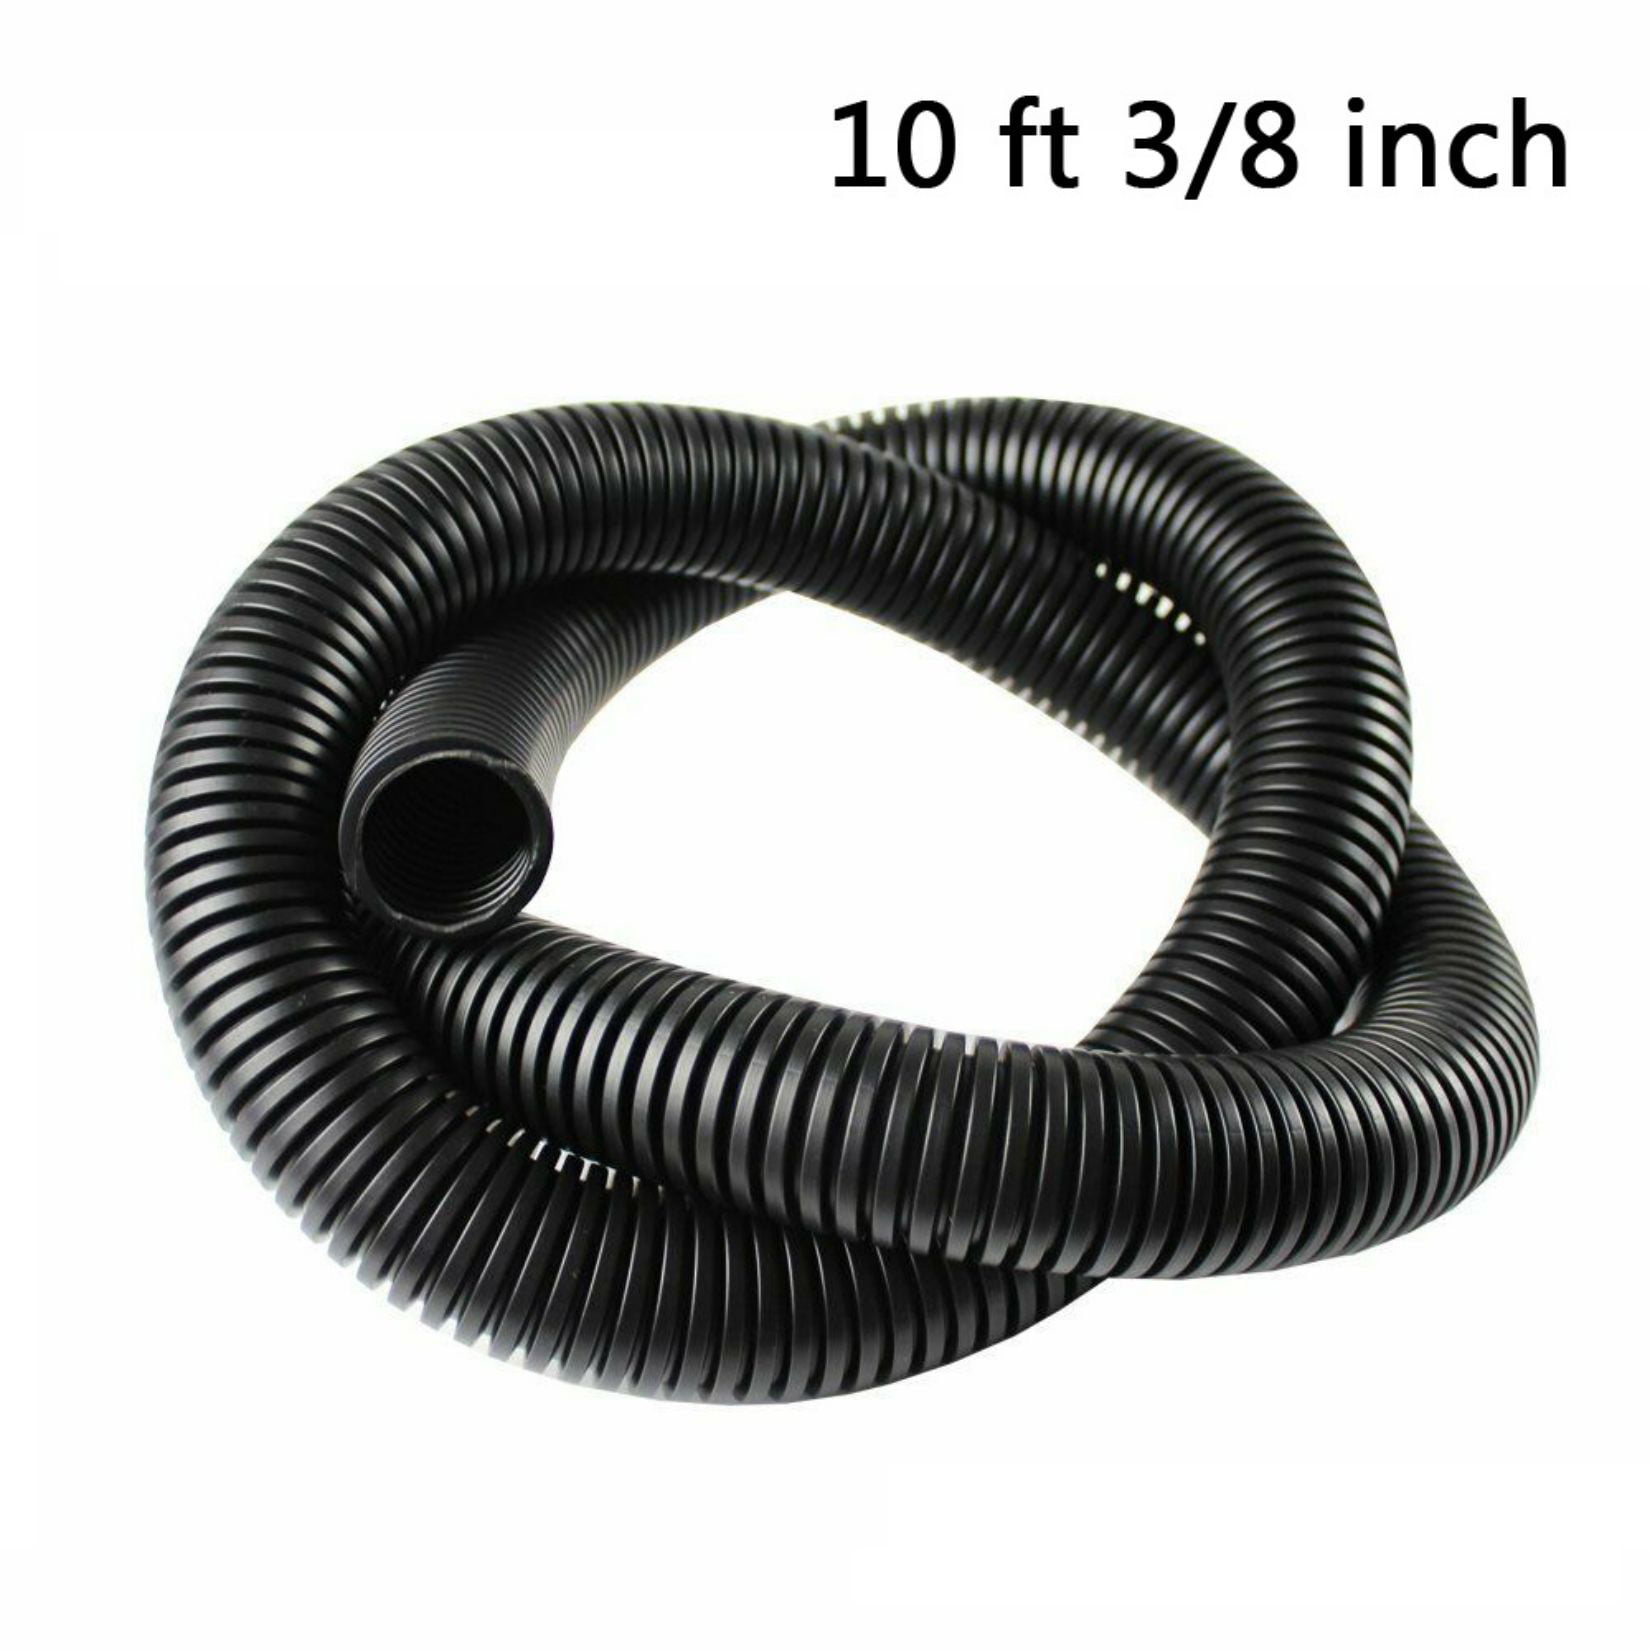 Lubricating Oil Hose,NBR,5mm ID x 10mm OD,5M/16.4FT,Water Hose Pipe Tubing 